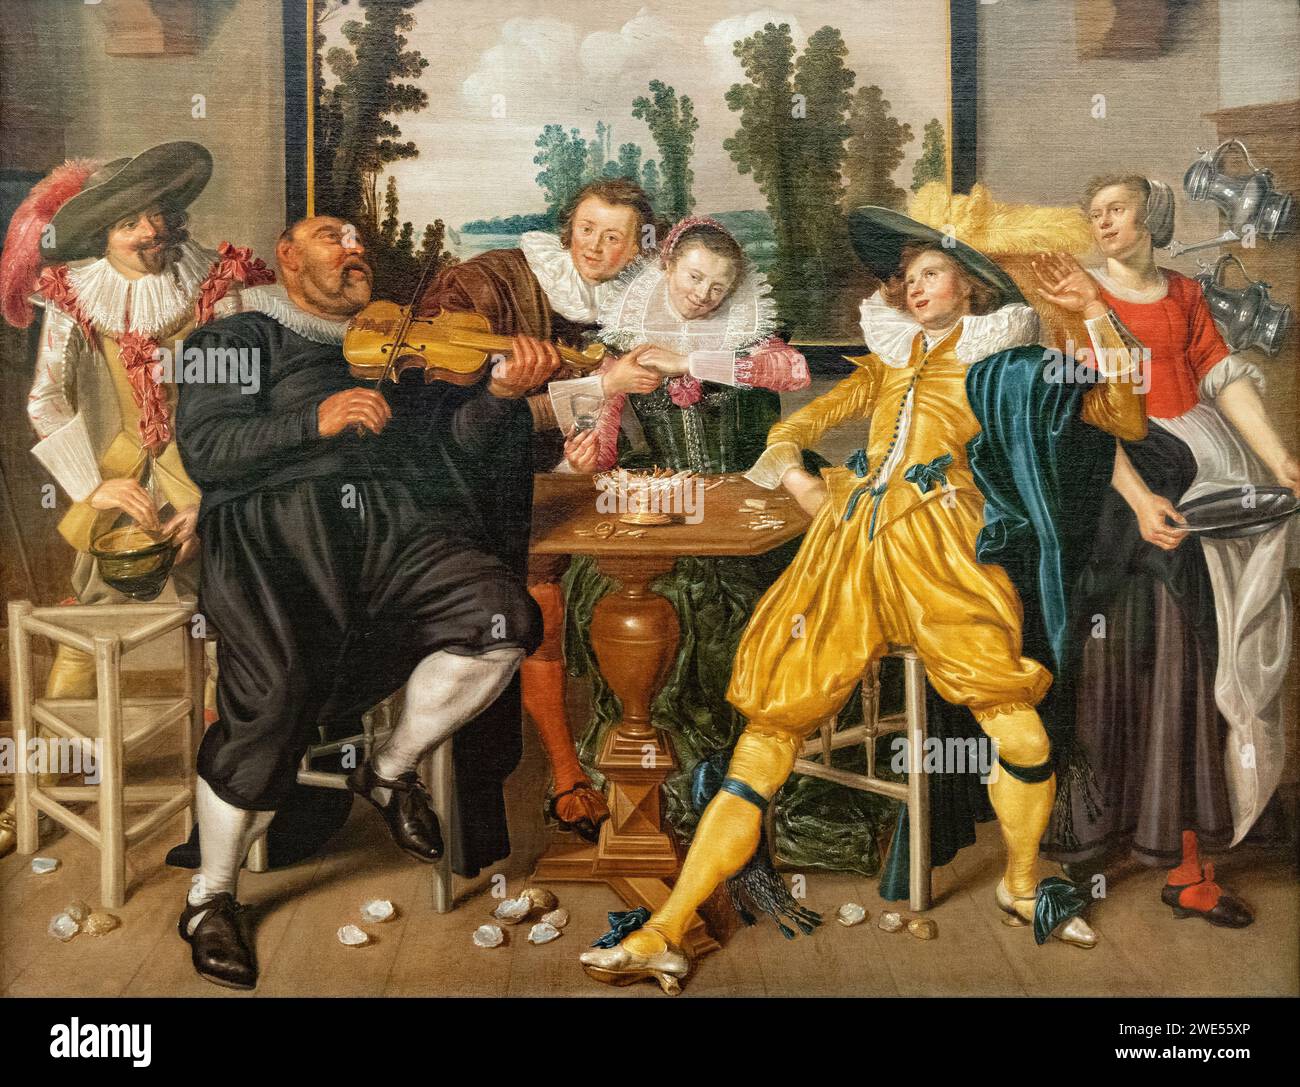 Willem Pieterszoon Buytewech Painting; "Cheerful Society", 1622-24. Pittore olandese del secolo d'oro, Foto Stock